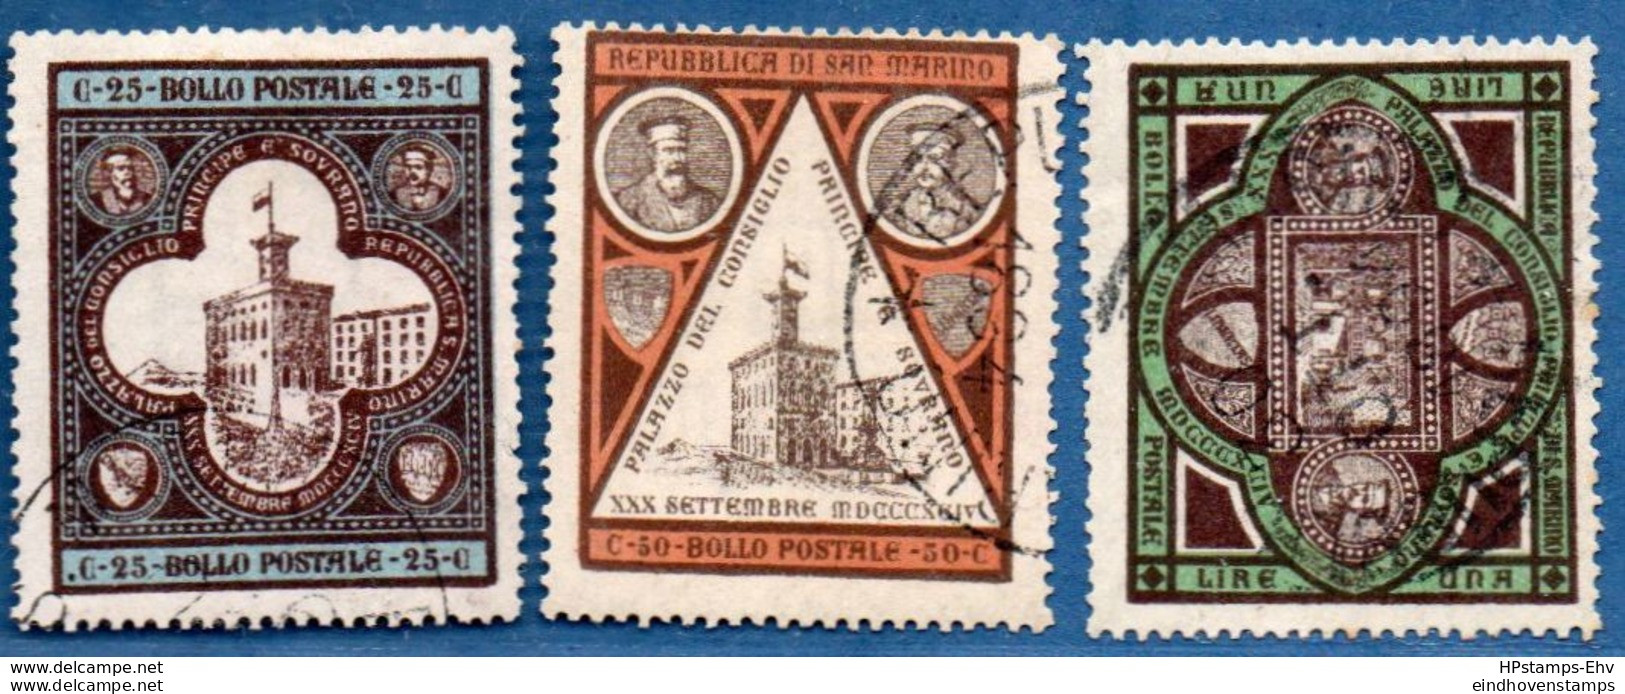 San Marino 1894 Inauguration Government Building Set 3 Values Cancelled - 2005.2619 Dull Printing - Gebraucht